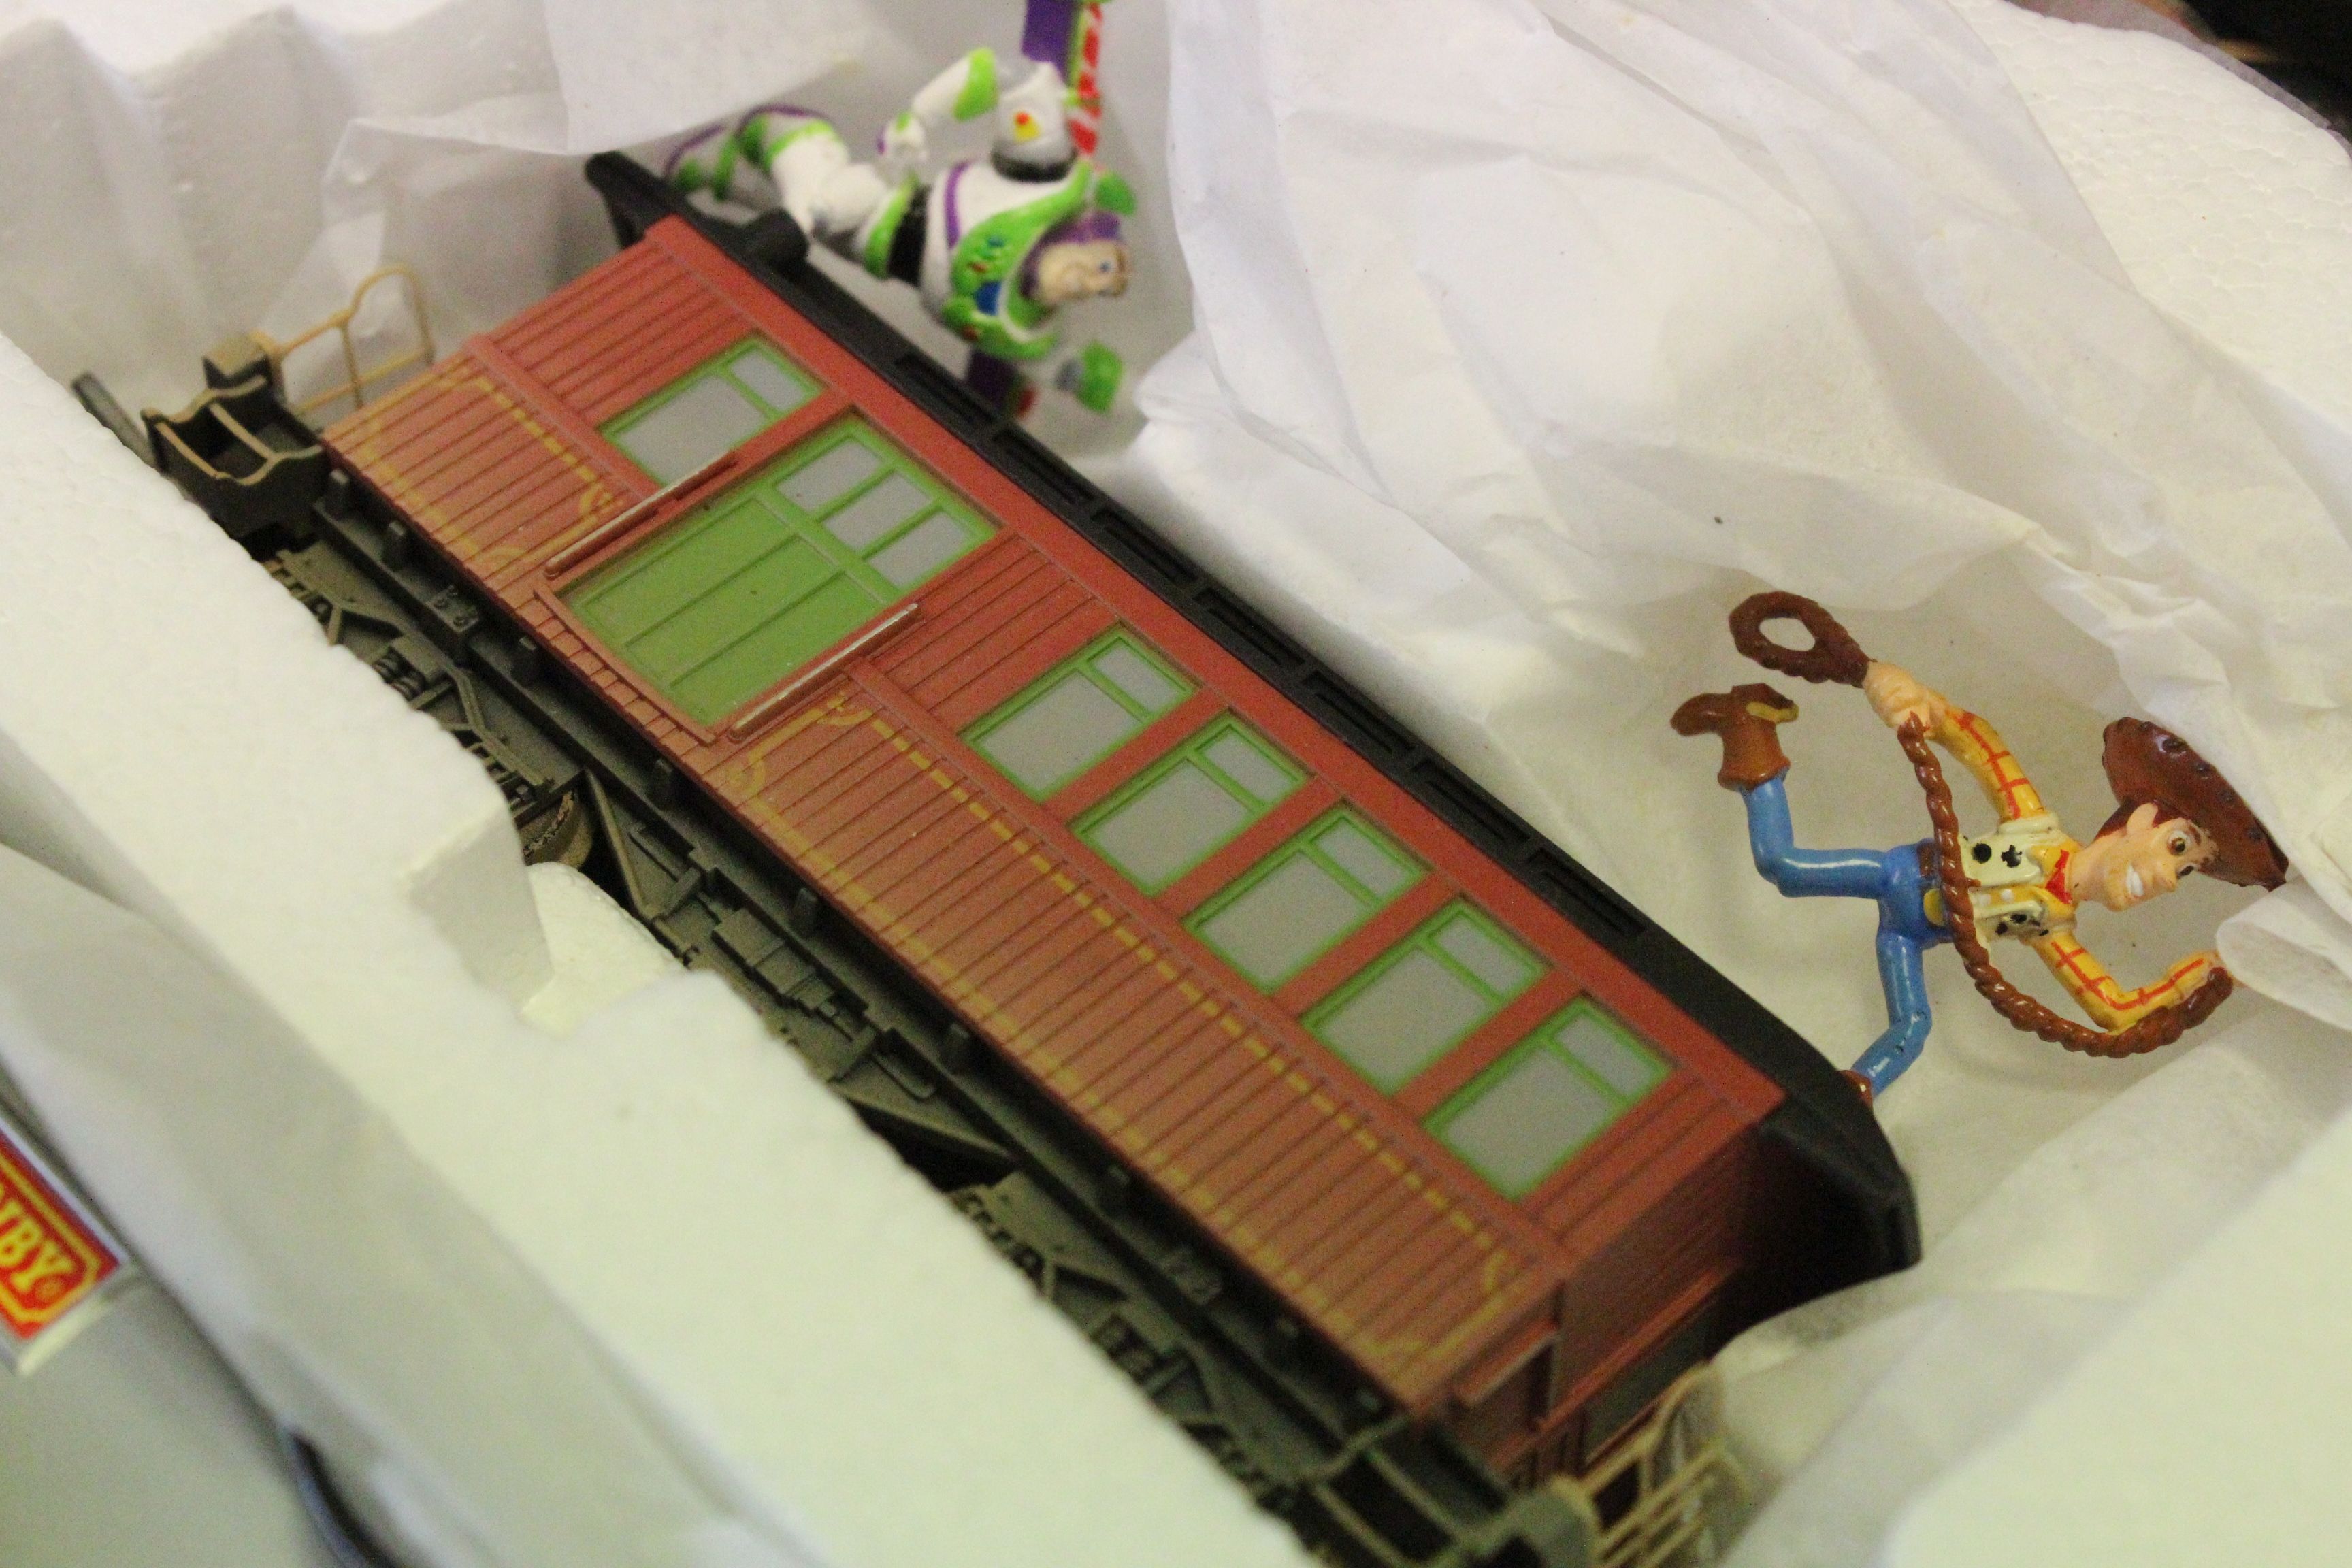 Boxed Hornby OO gauge R1149 Toy Story 3 train set, complete with locomotive, rolling stock etc - Image 6 of 7